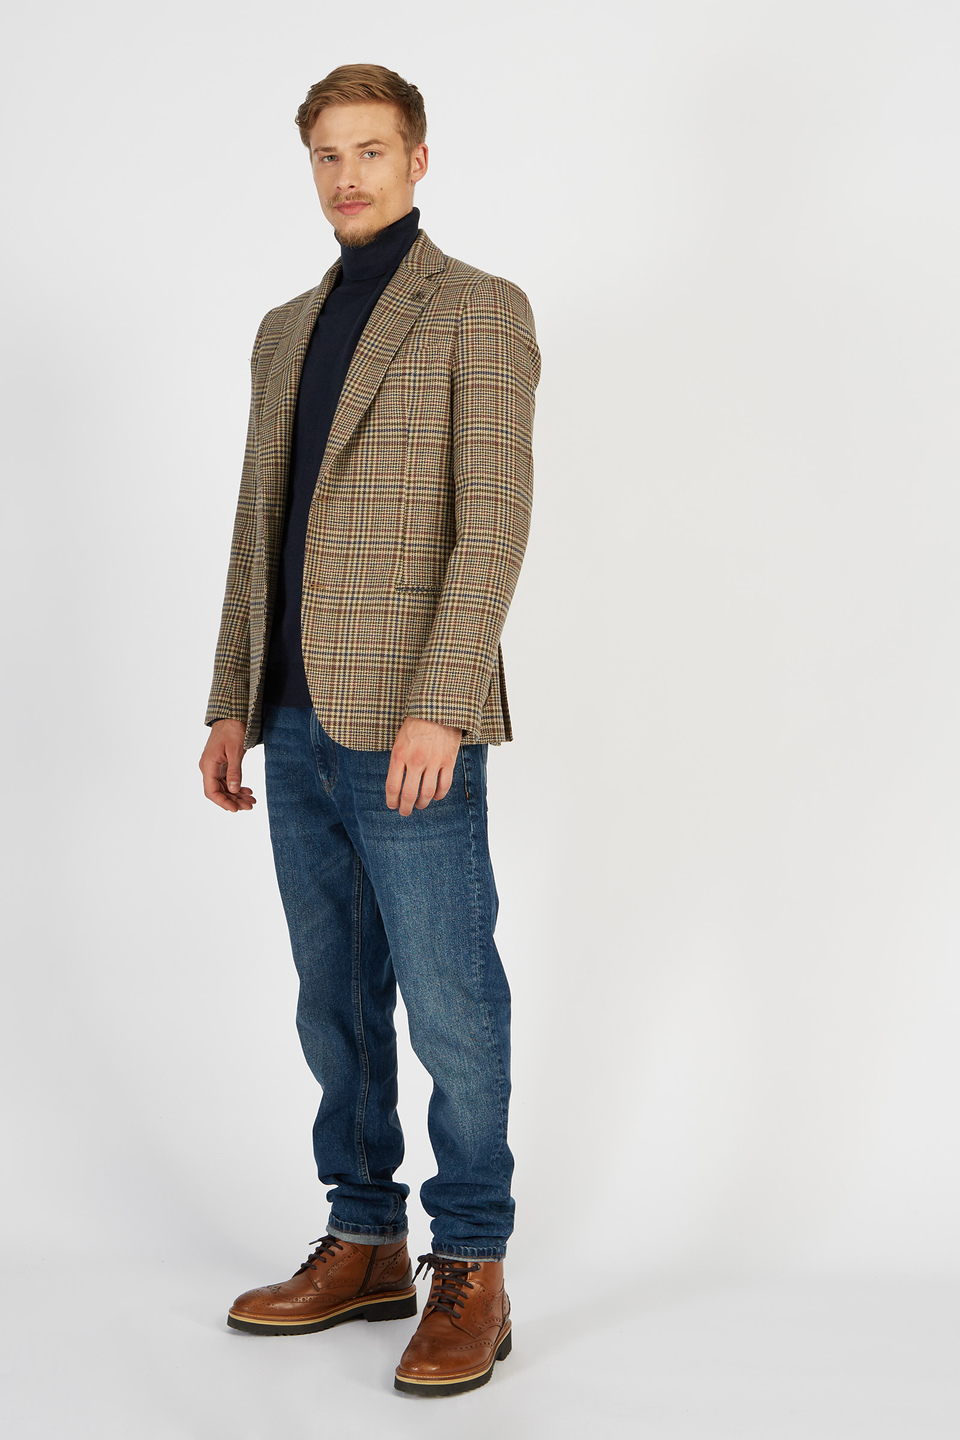 Single-breasted wool blend Blue Ribbon jacket with two regular fit buttons | La Martina - Official Online Shop